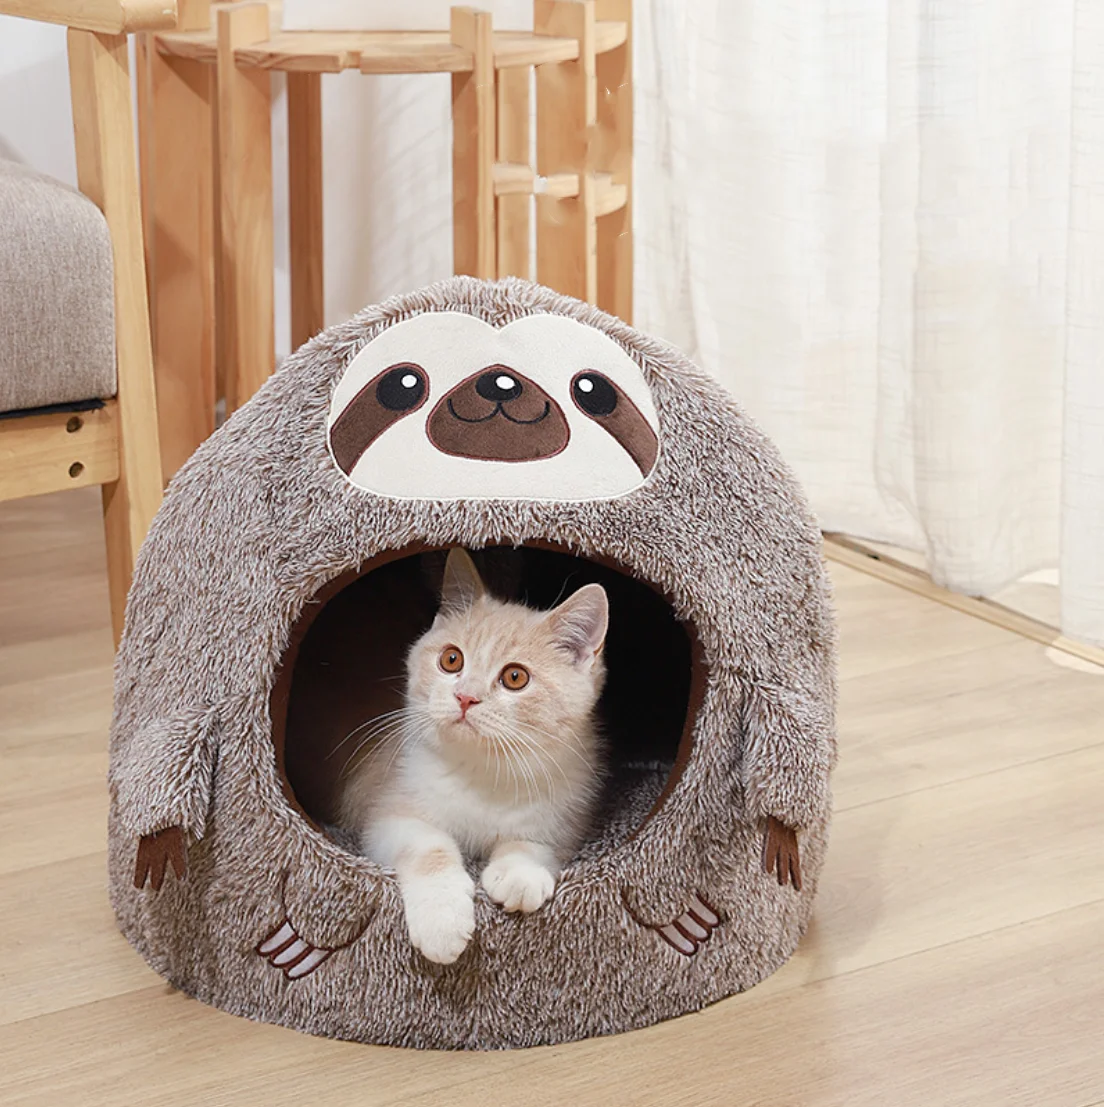 adorable cat igloo bed with sloth design